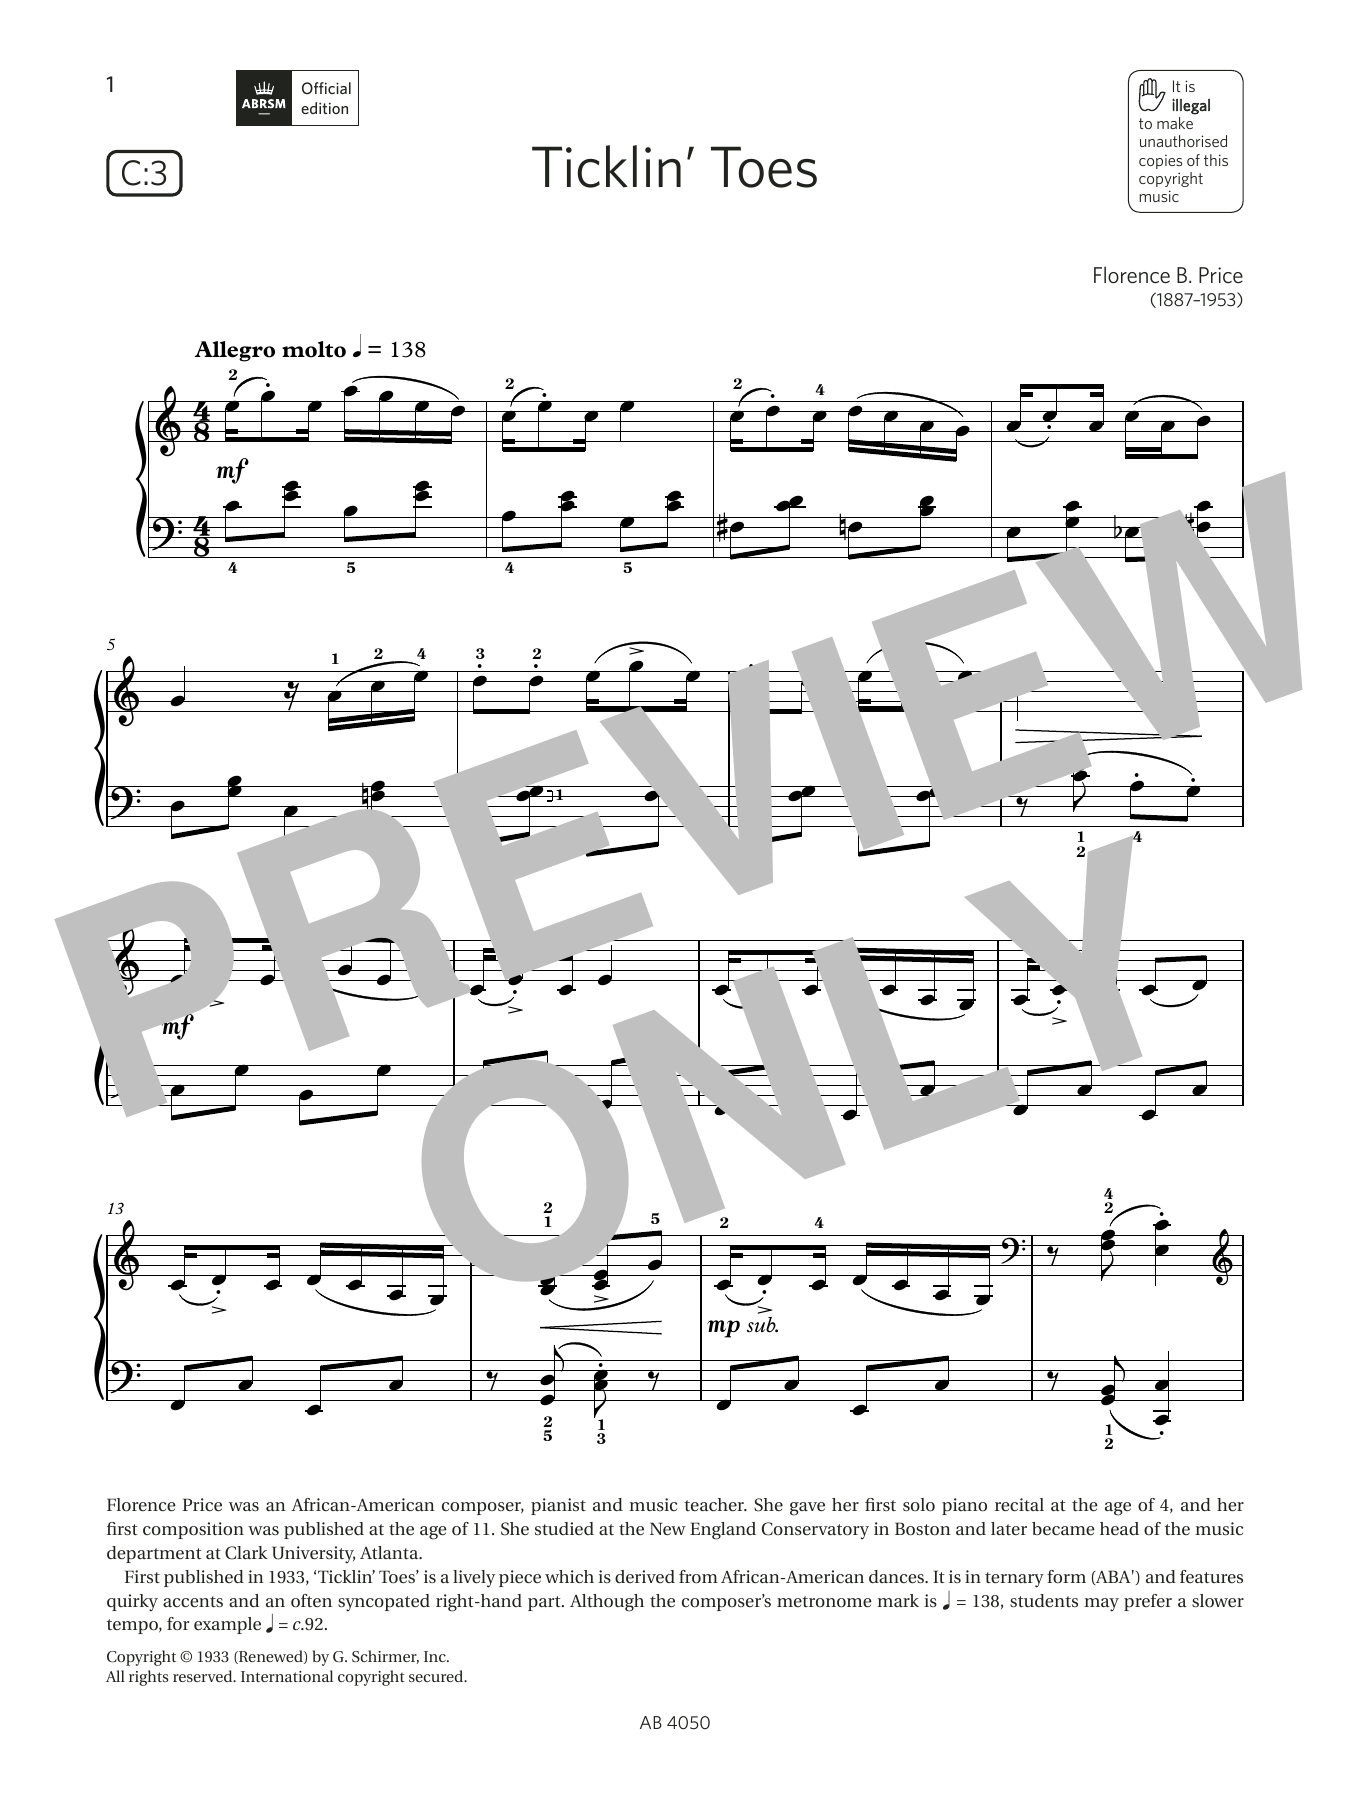 Download Florence B Price Ticklin Toes (Grade 4, list C3, from th Sheet Music